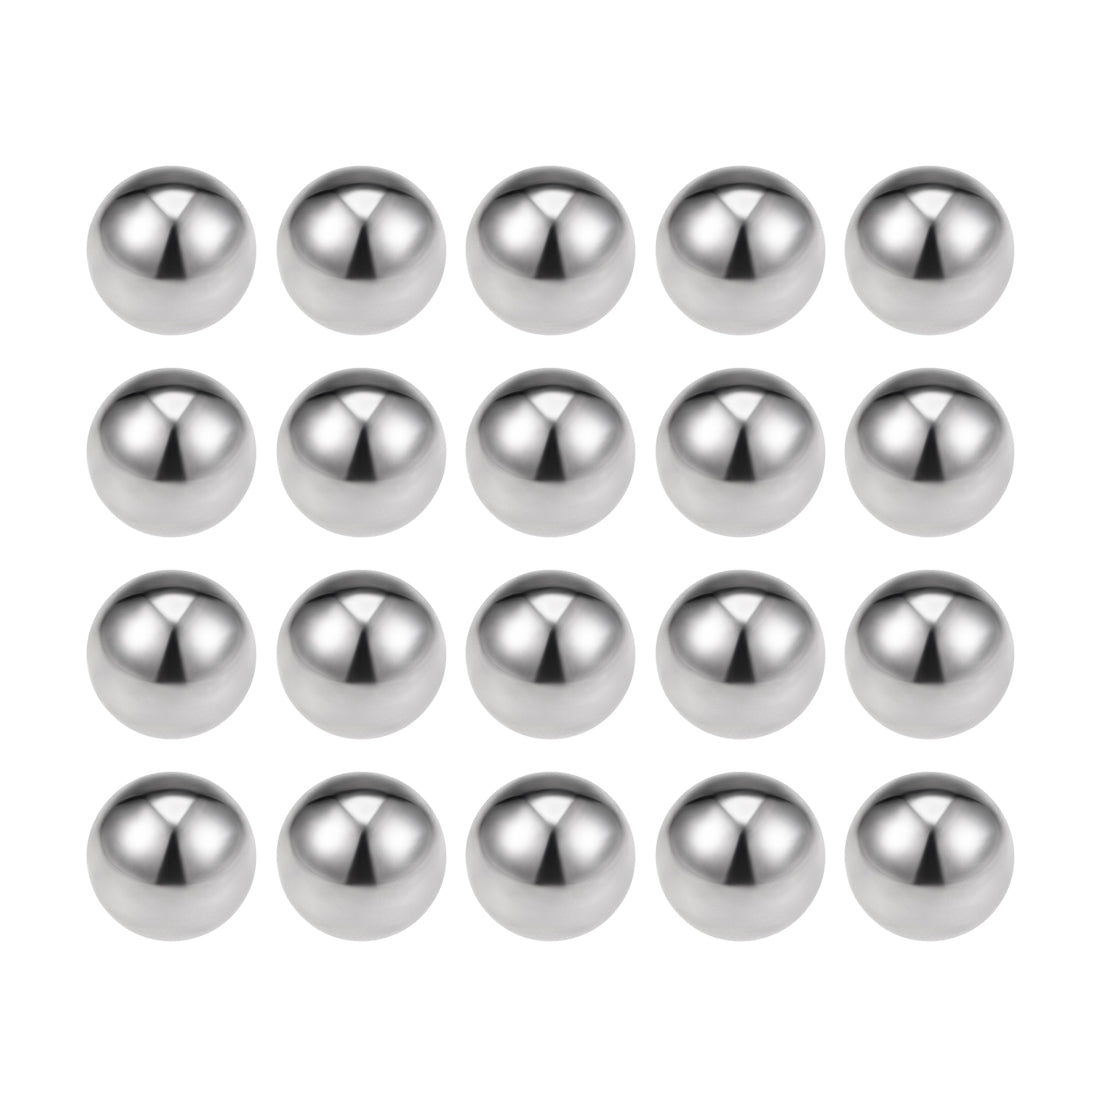 Uxcell Uxcell 1/4" Bearing Balls 304 Stainless Steel G100 Precision Balls 50pcs